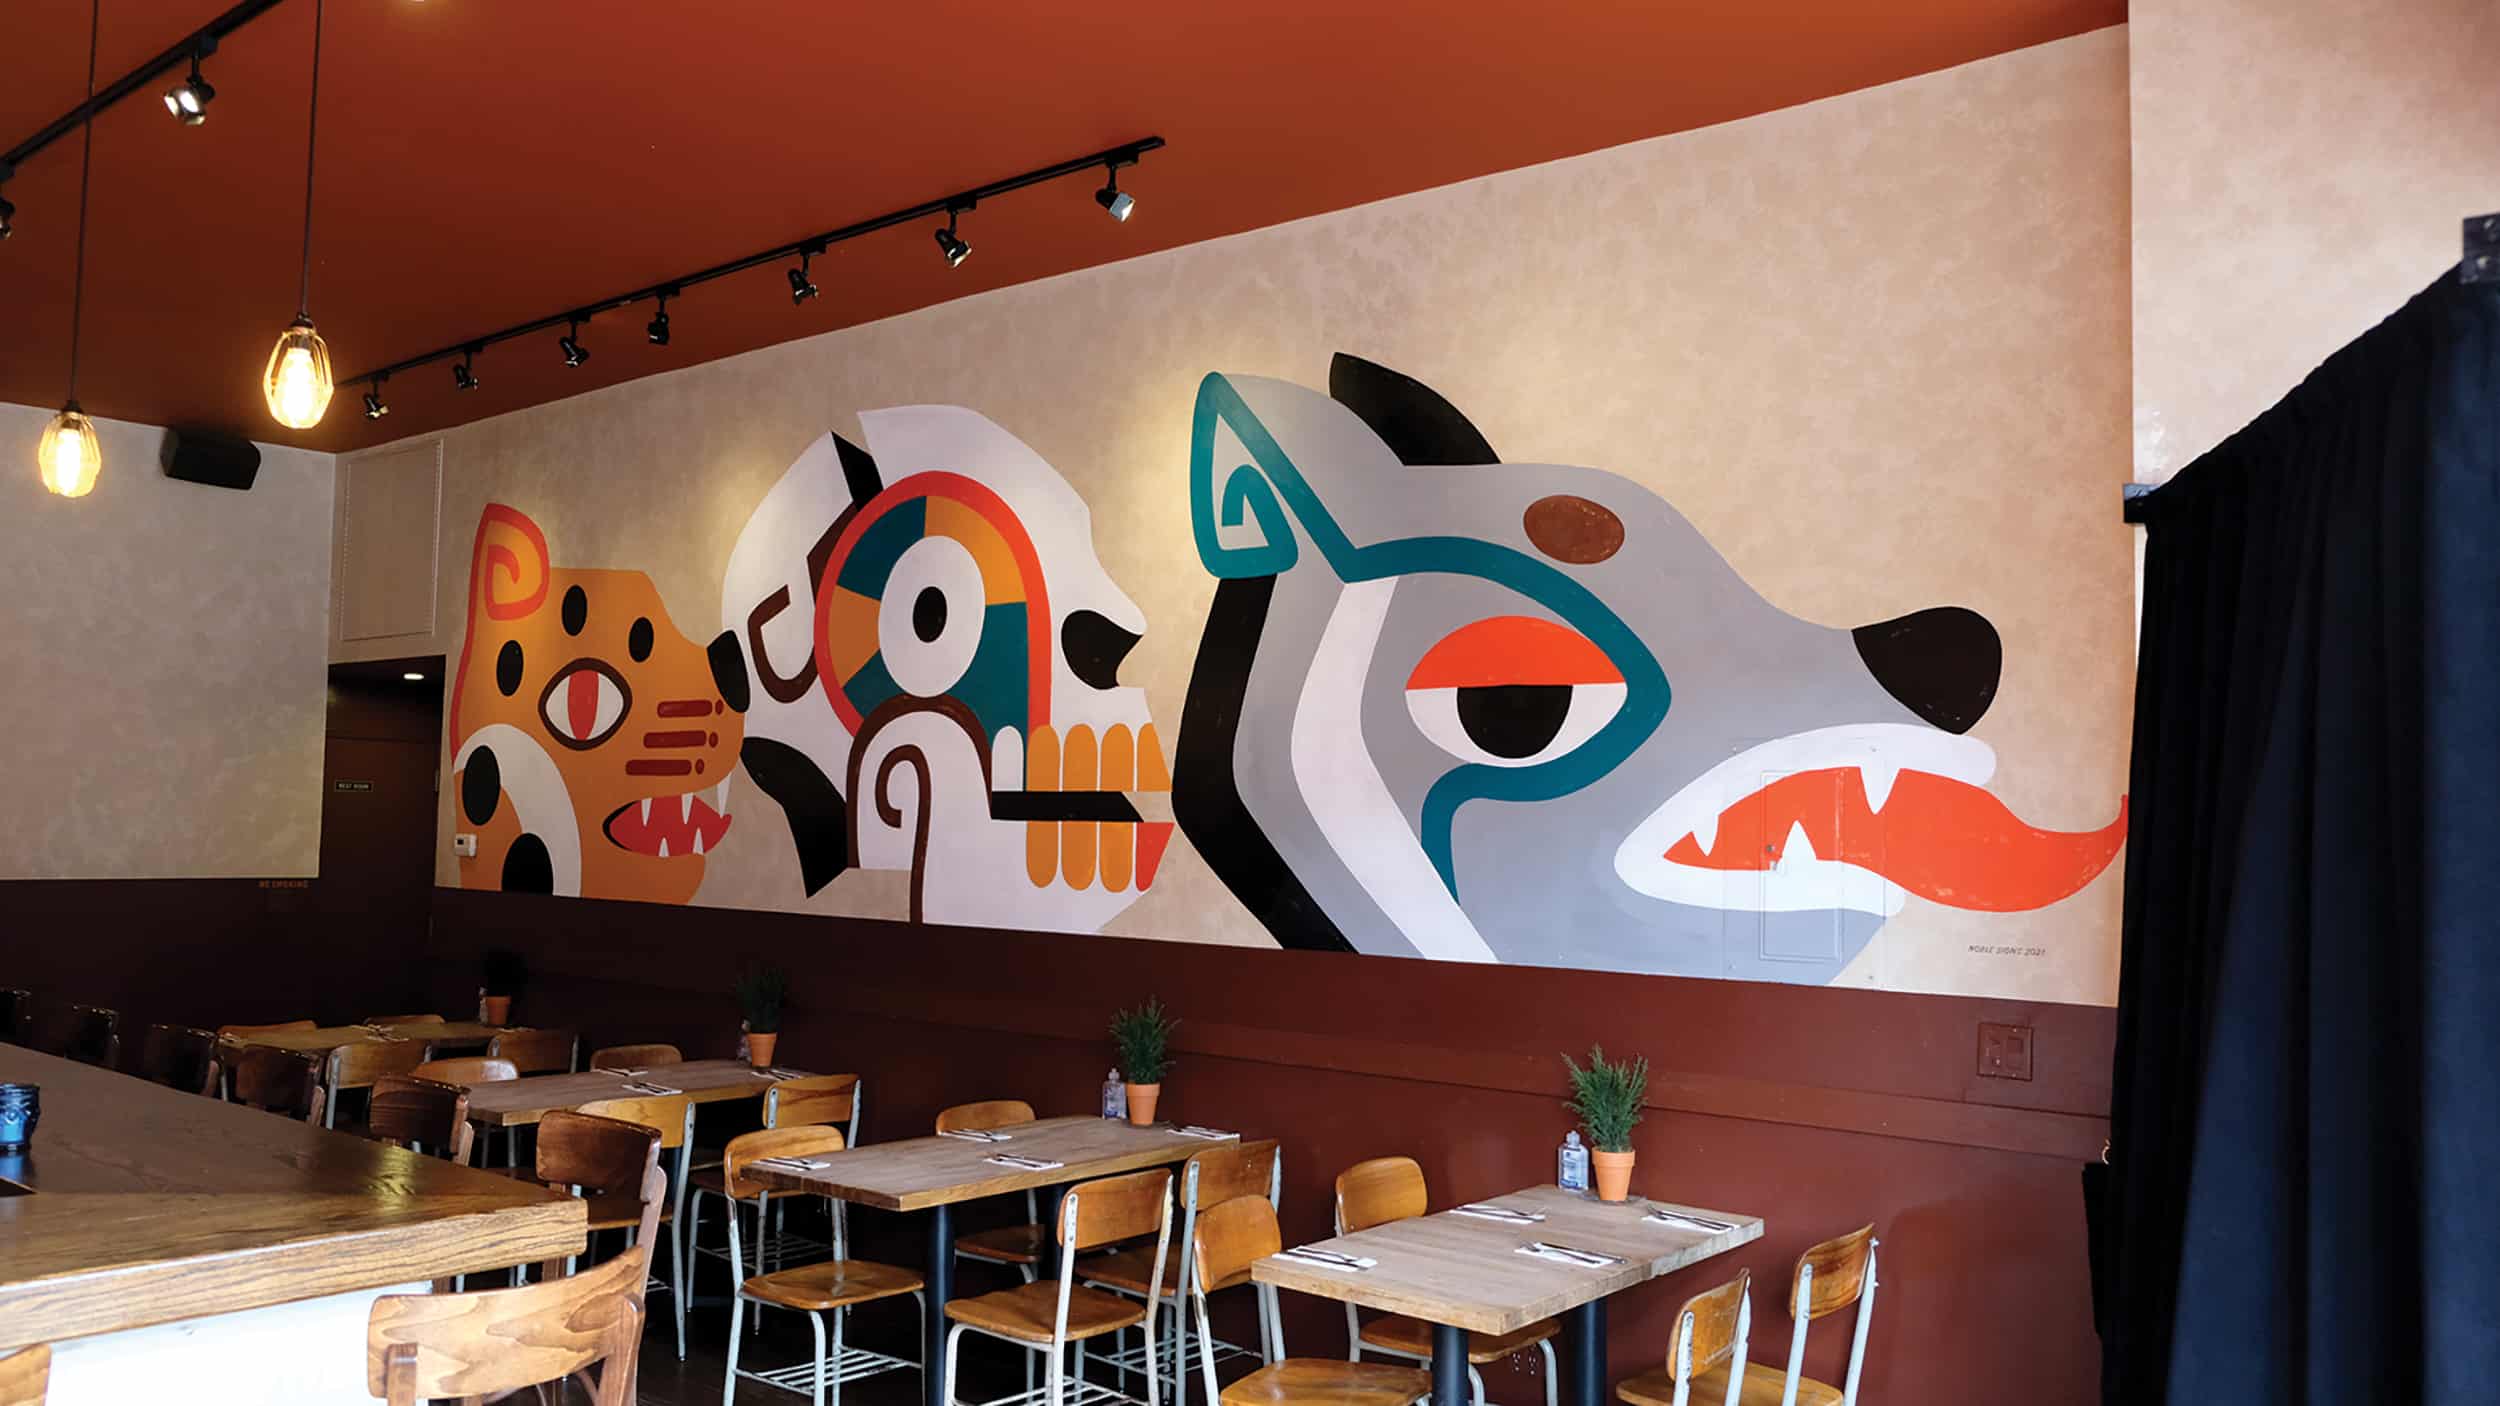 Head-Lines Without words This wall mural for a cantina conveys the brand without lettering.